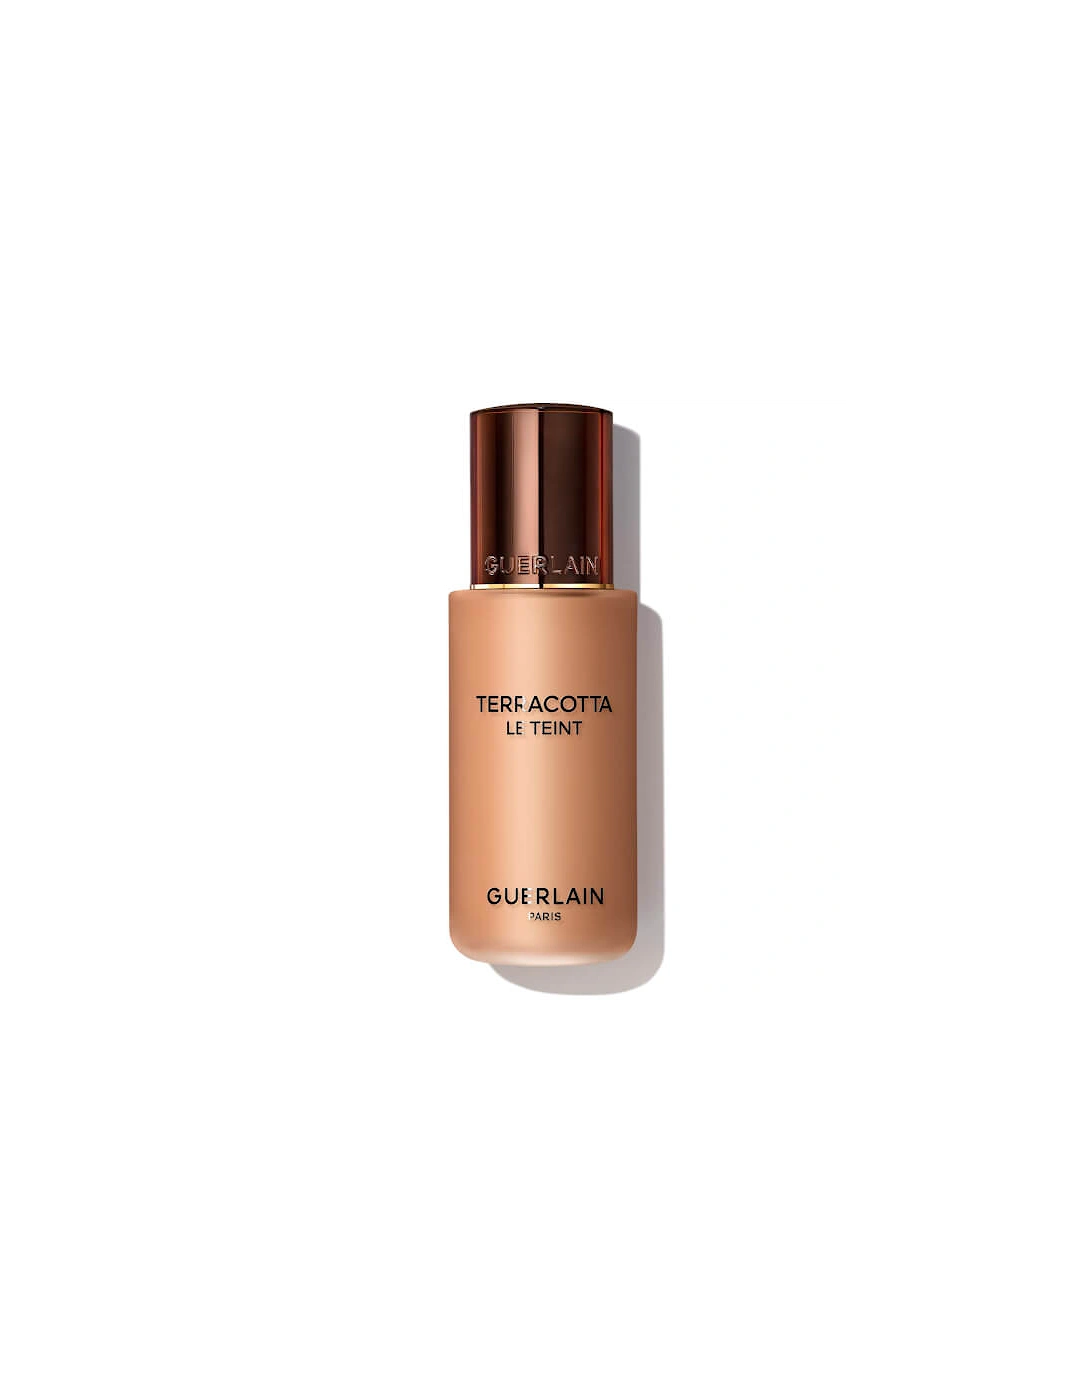 Terracotta Le Teint Healthy Glow Natural Perfection Foundation - 5N, 2 of 1